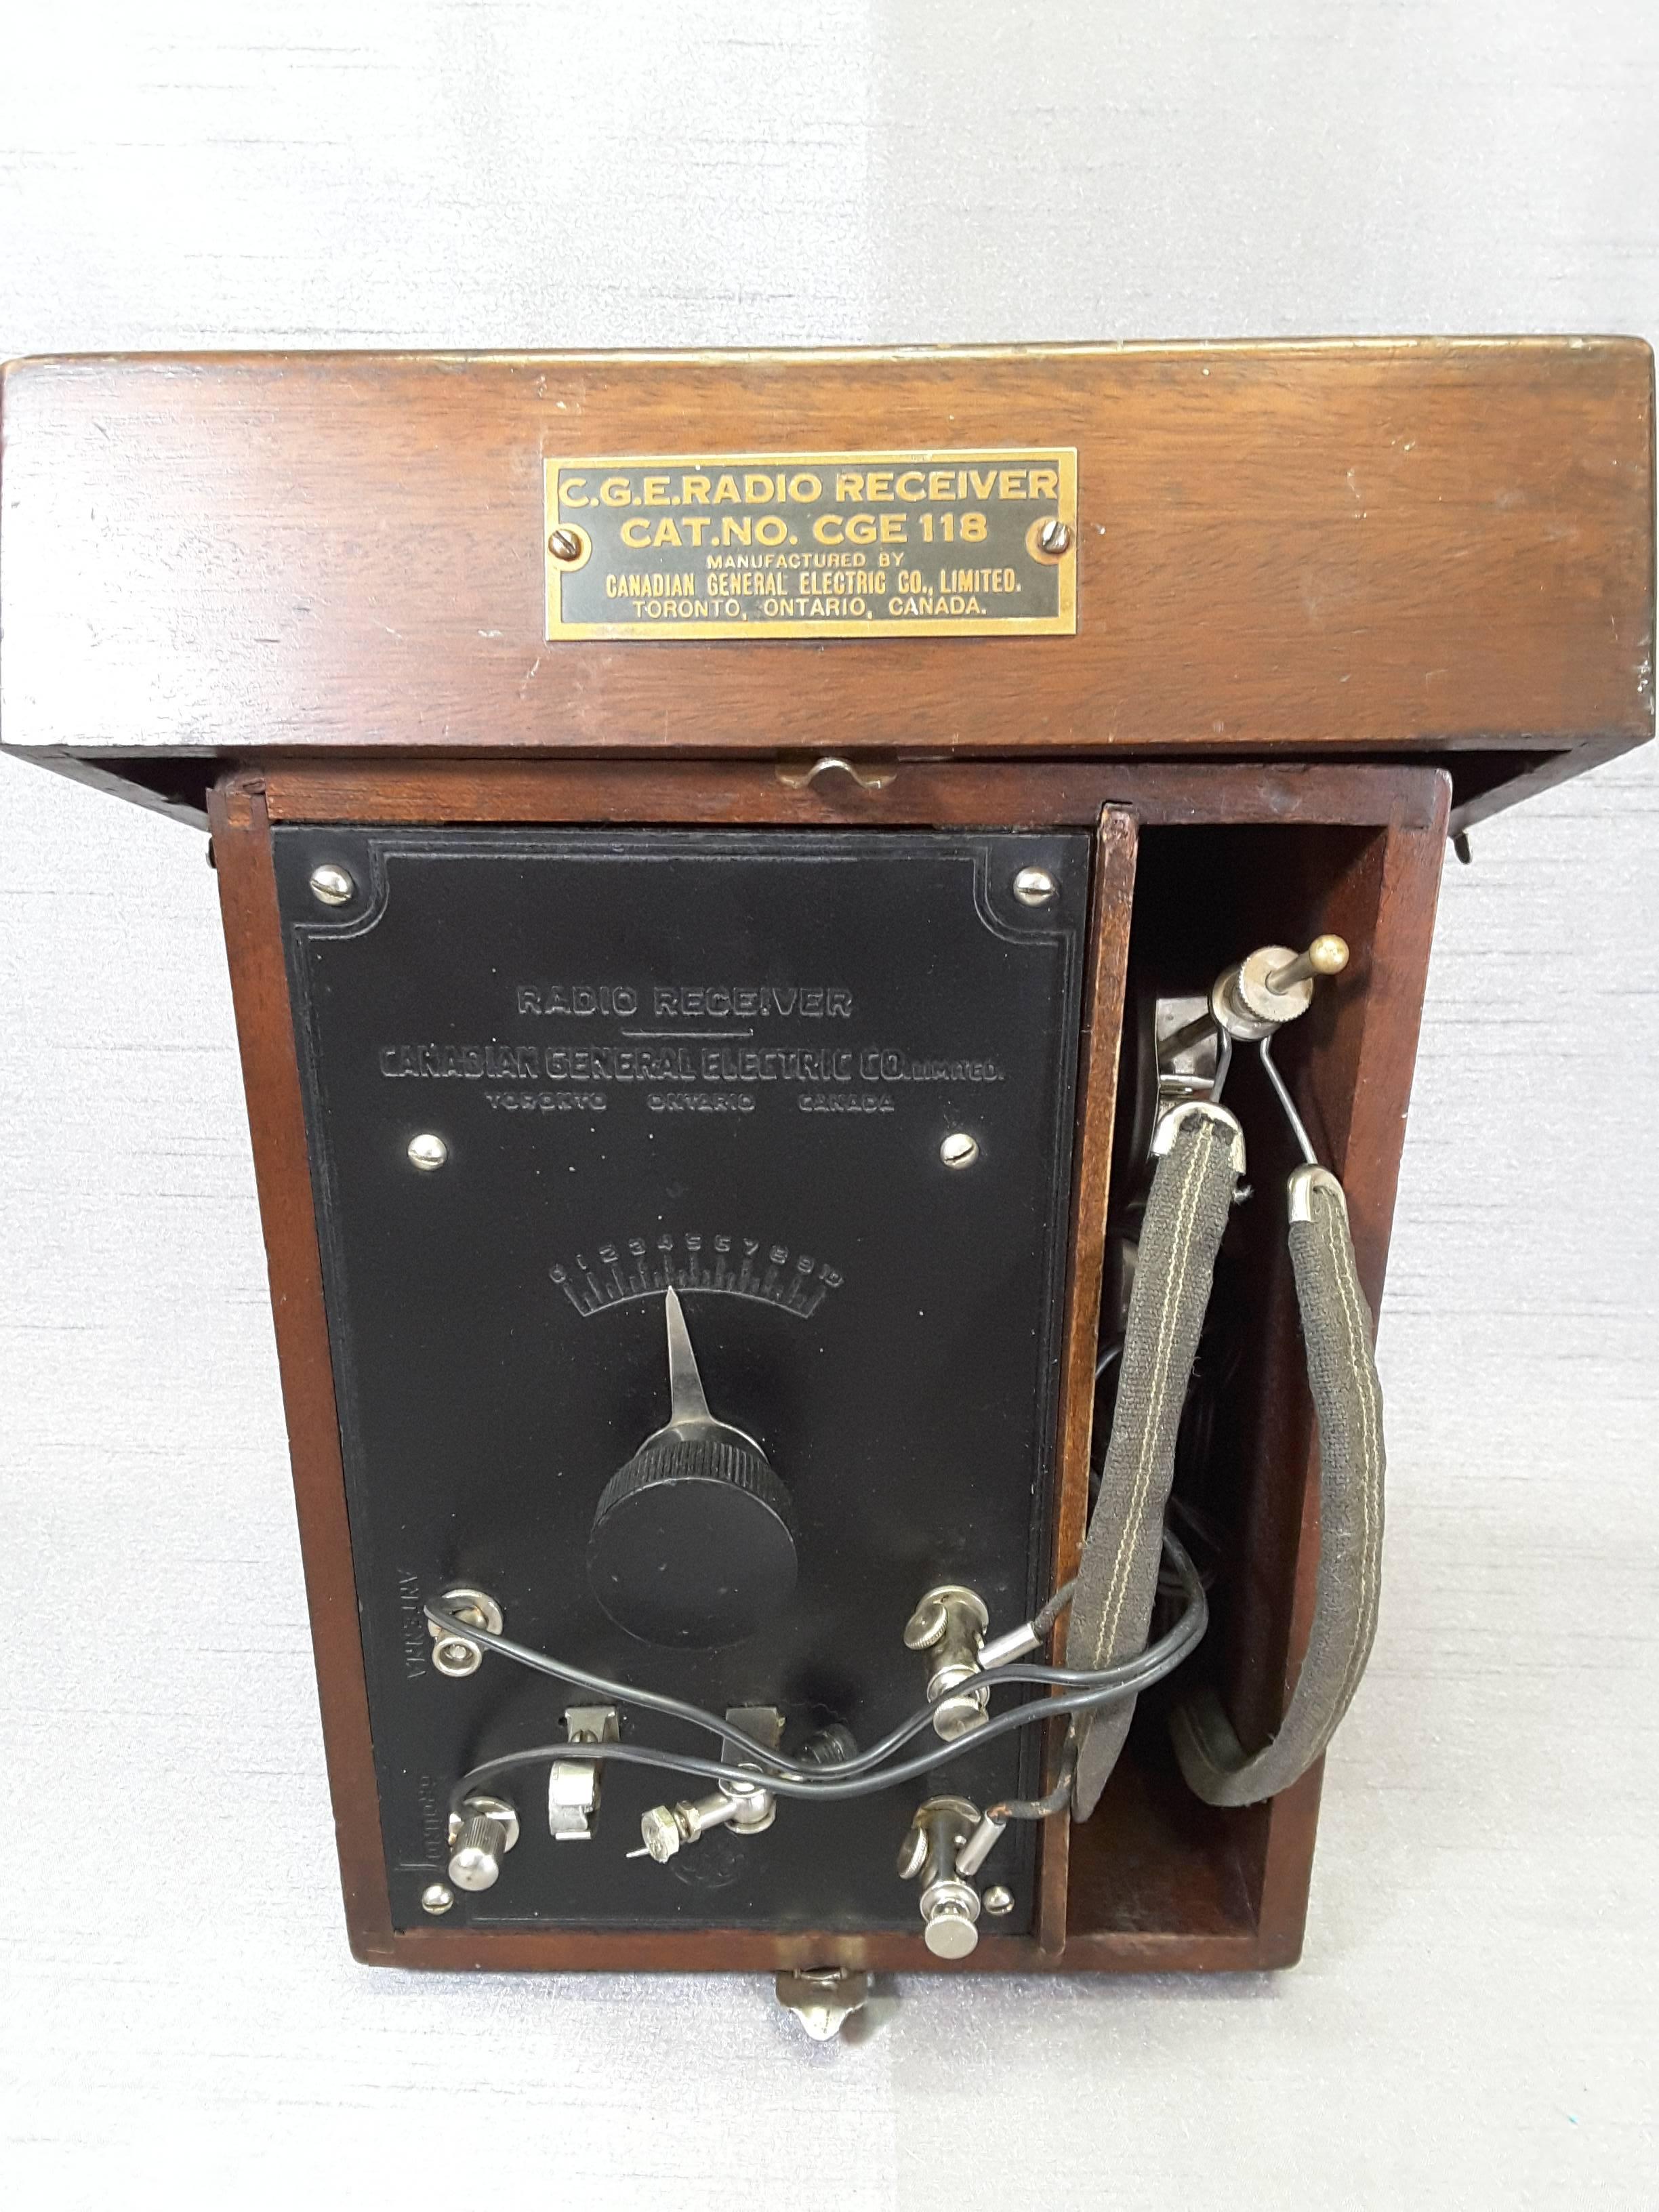 Crystal Radio Receiver number 118 by CGE. Co. Ltd. Circa 1929-1935, Made in Canada, by Canadian General Electric Co. Limited, Toronto Ontario, Canada. The receiver is cased in a mahogany fitted box, The radio has all dials, wires and original